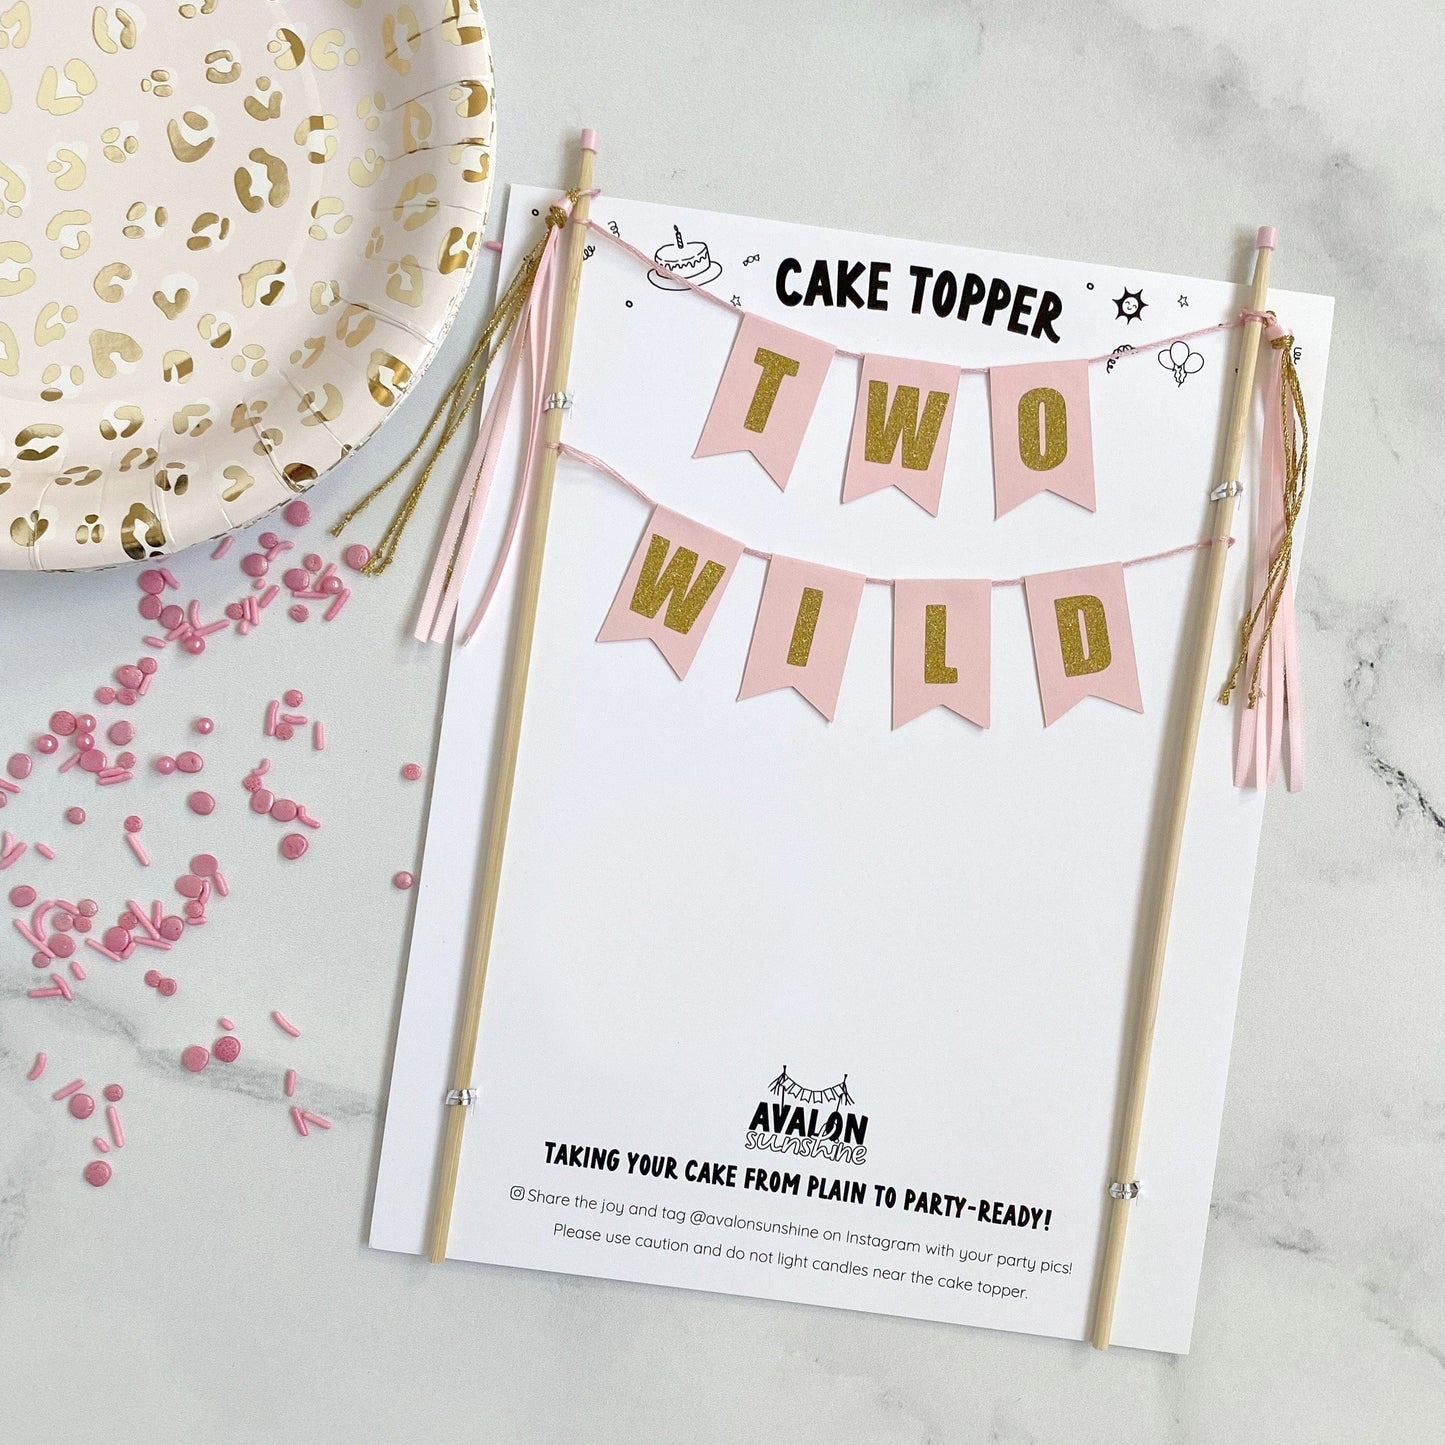 
                  
                    "TWO WILD" birthday cake topper for girls in pink and gold glitter | custom cake toppers made by Avalon Sunshine
                  
                